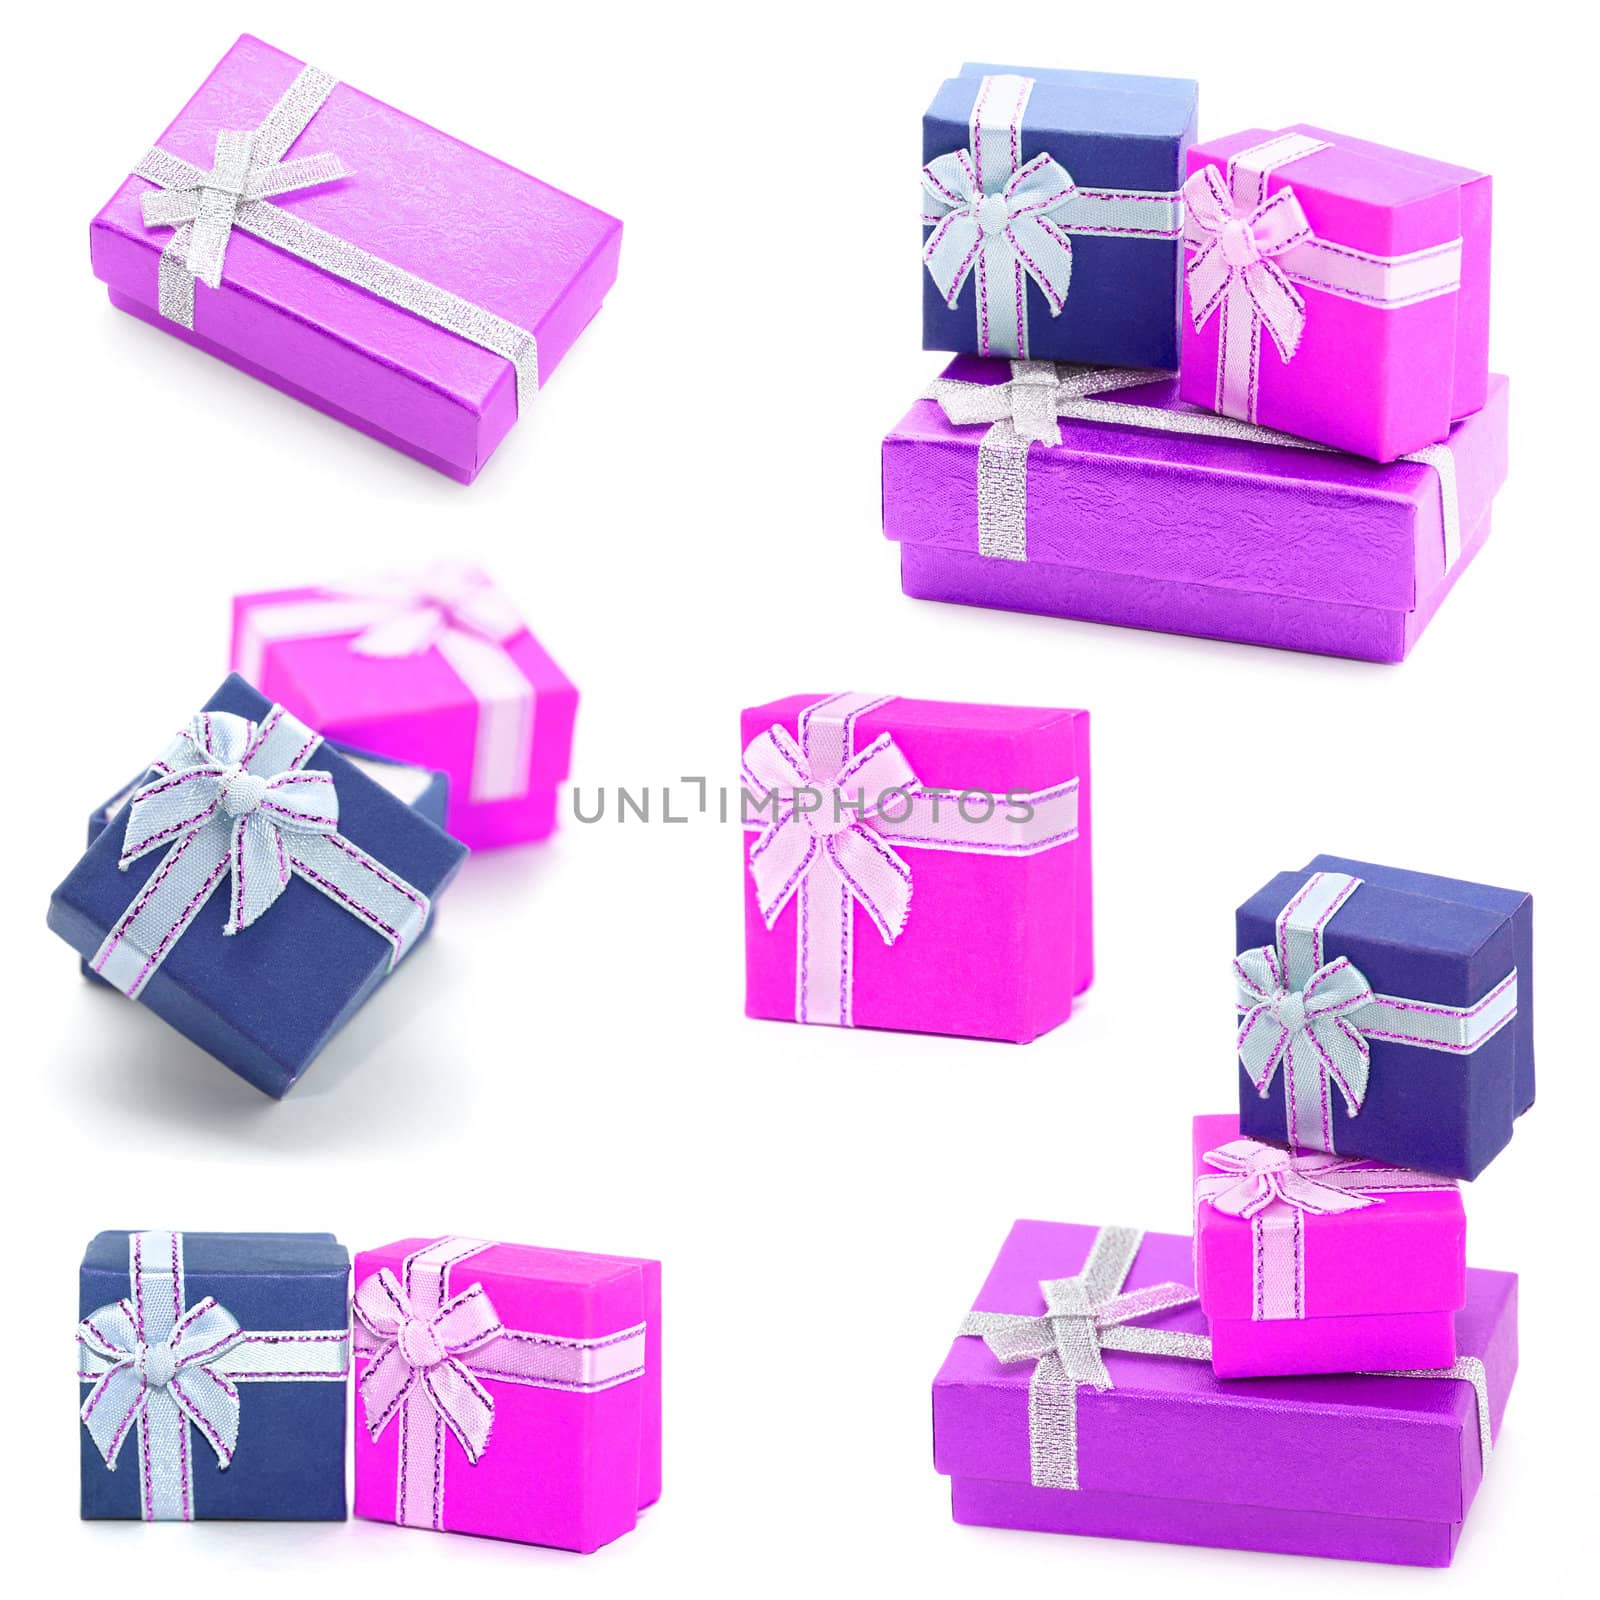 Gift boxes collection by Olinkau